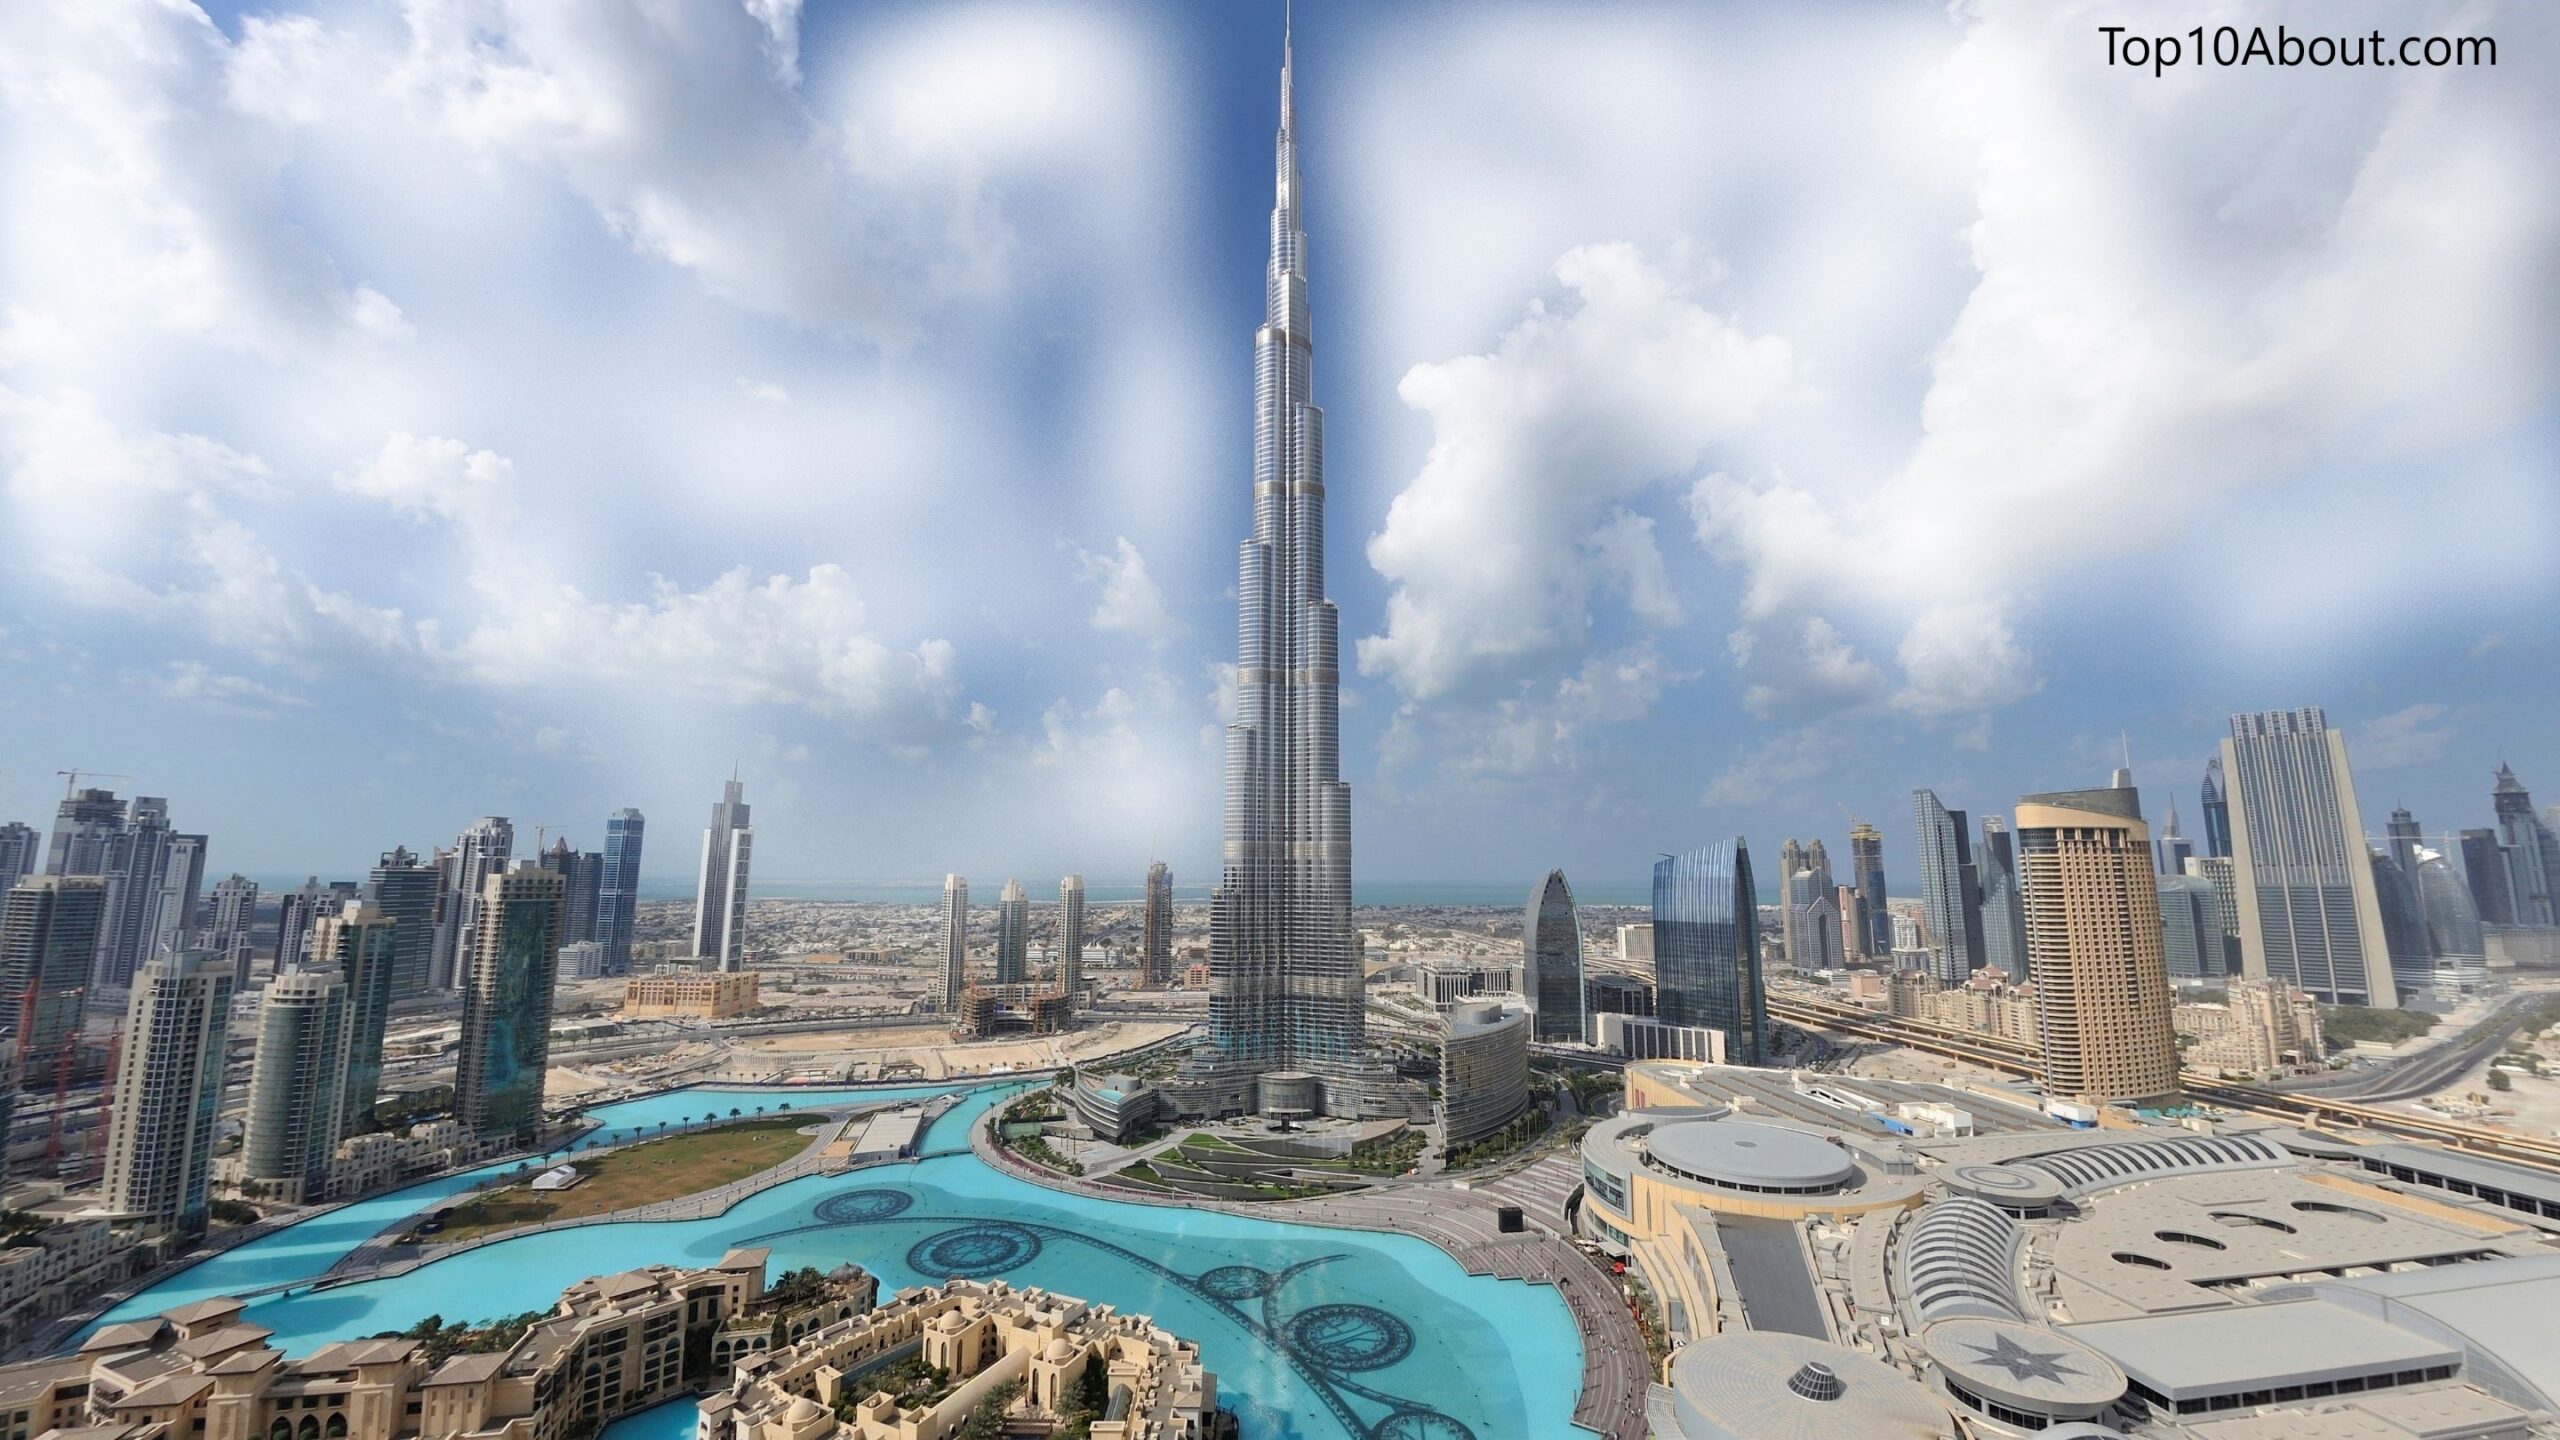 Top 10 Tallest Buildings in the World 2023 Top 10 About